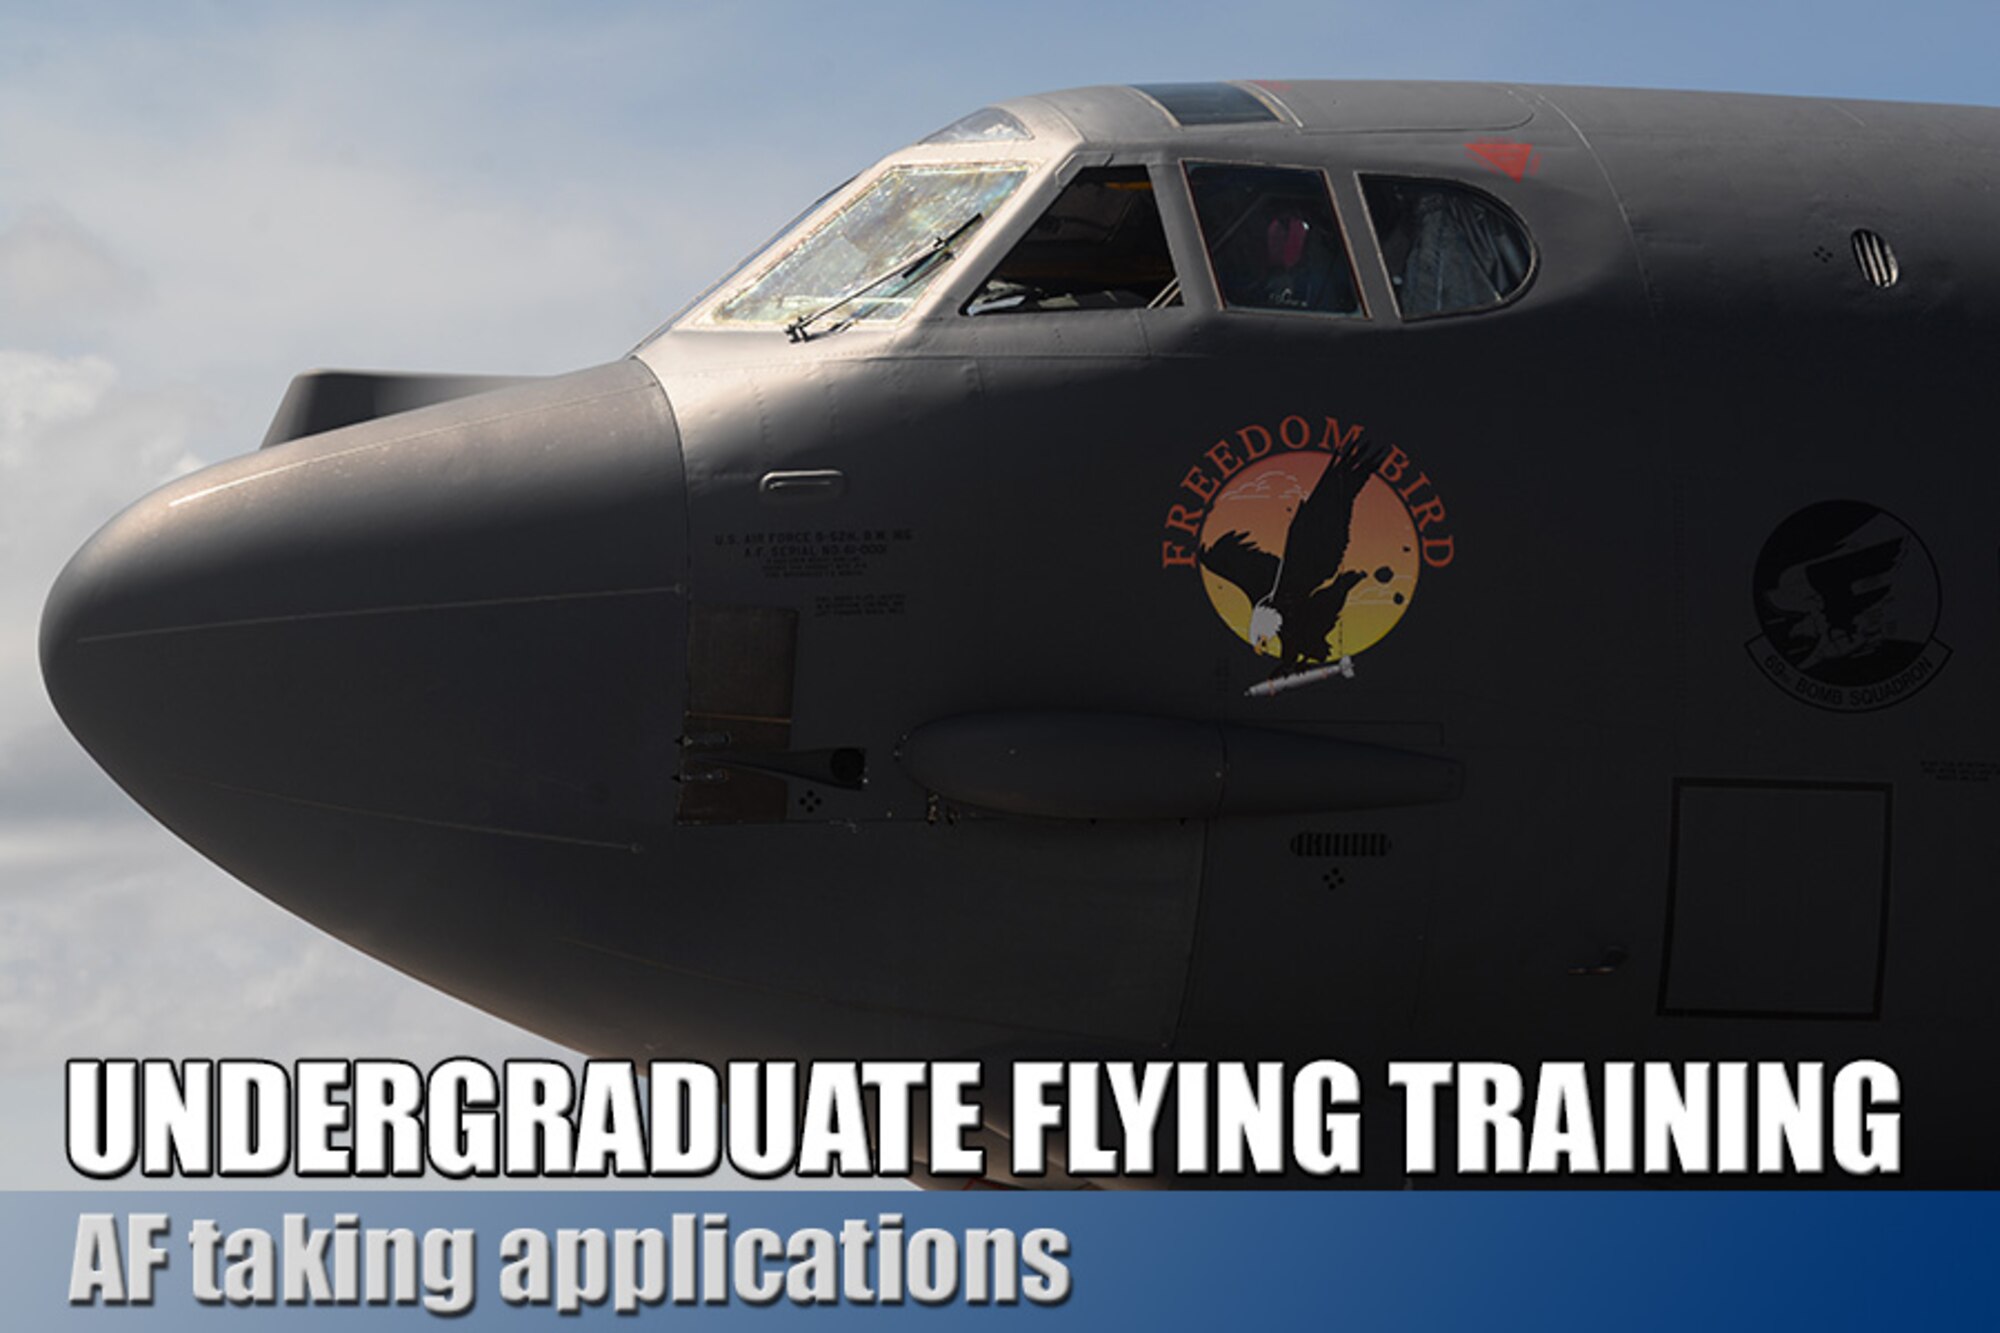 The Air Force UFT selection board is taking applications for pilot, remotely piloted aircraft pilot, combat systems officer and air battle manager training opportunities. (AFPC courtesy graphic)